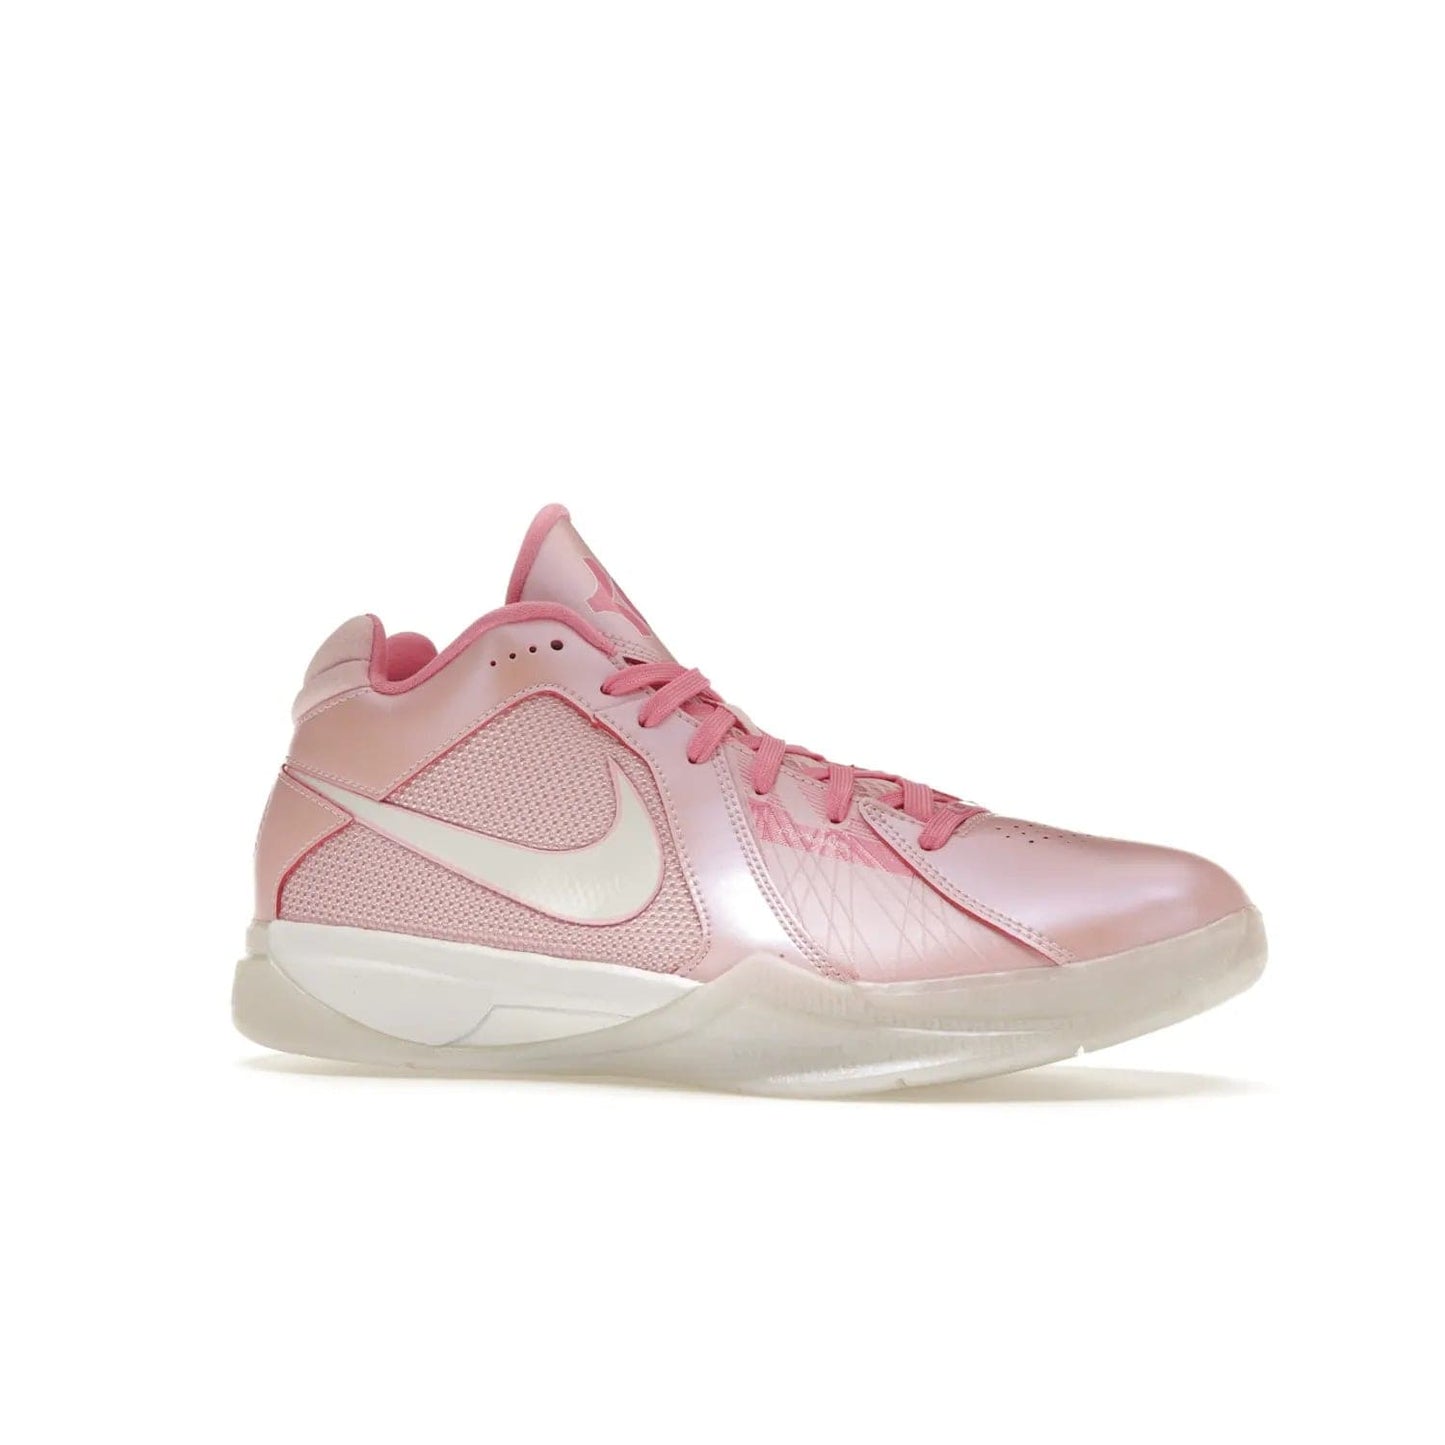 Nike KD 3 Aunt Pearl - Image 3 - Only at www.BallersClubKickz.com - Introducing the Nike KD 3 Aunt Pearl. Featuring a bold Medium Soft Pink, White, & Lotus Pink colorway. Get ready to stand out this October 15th.